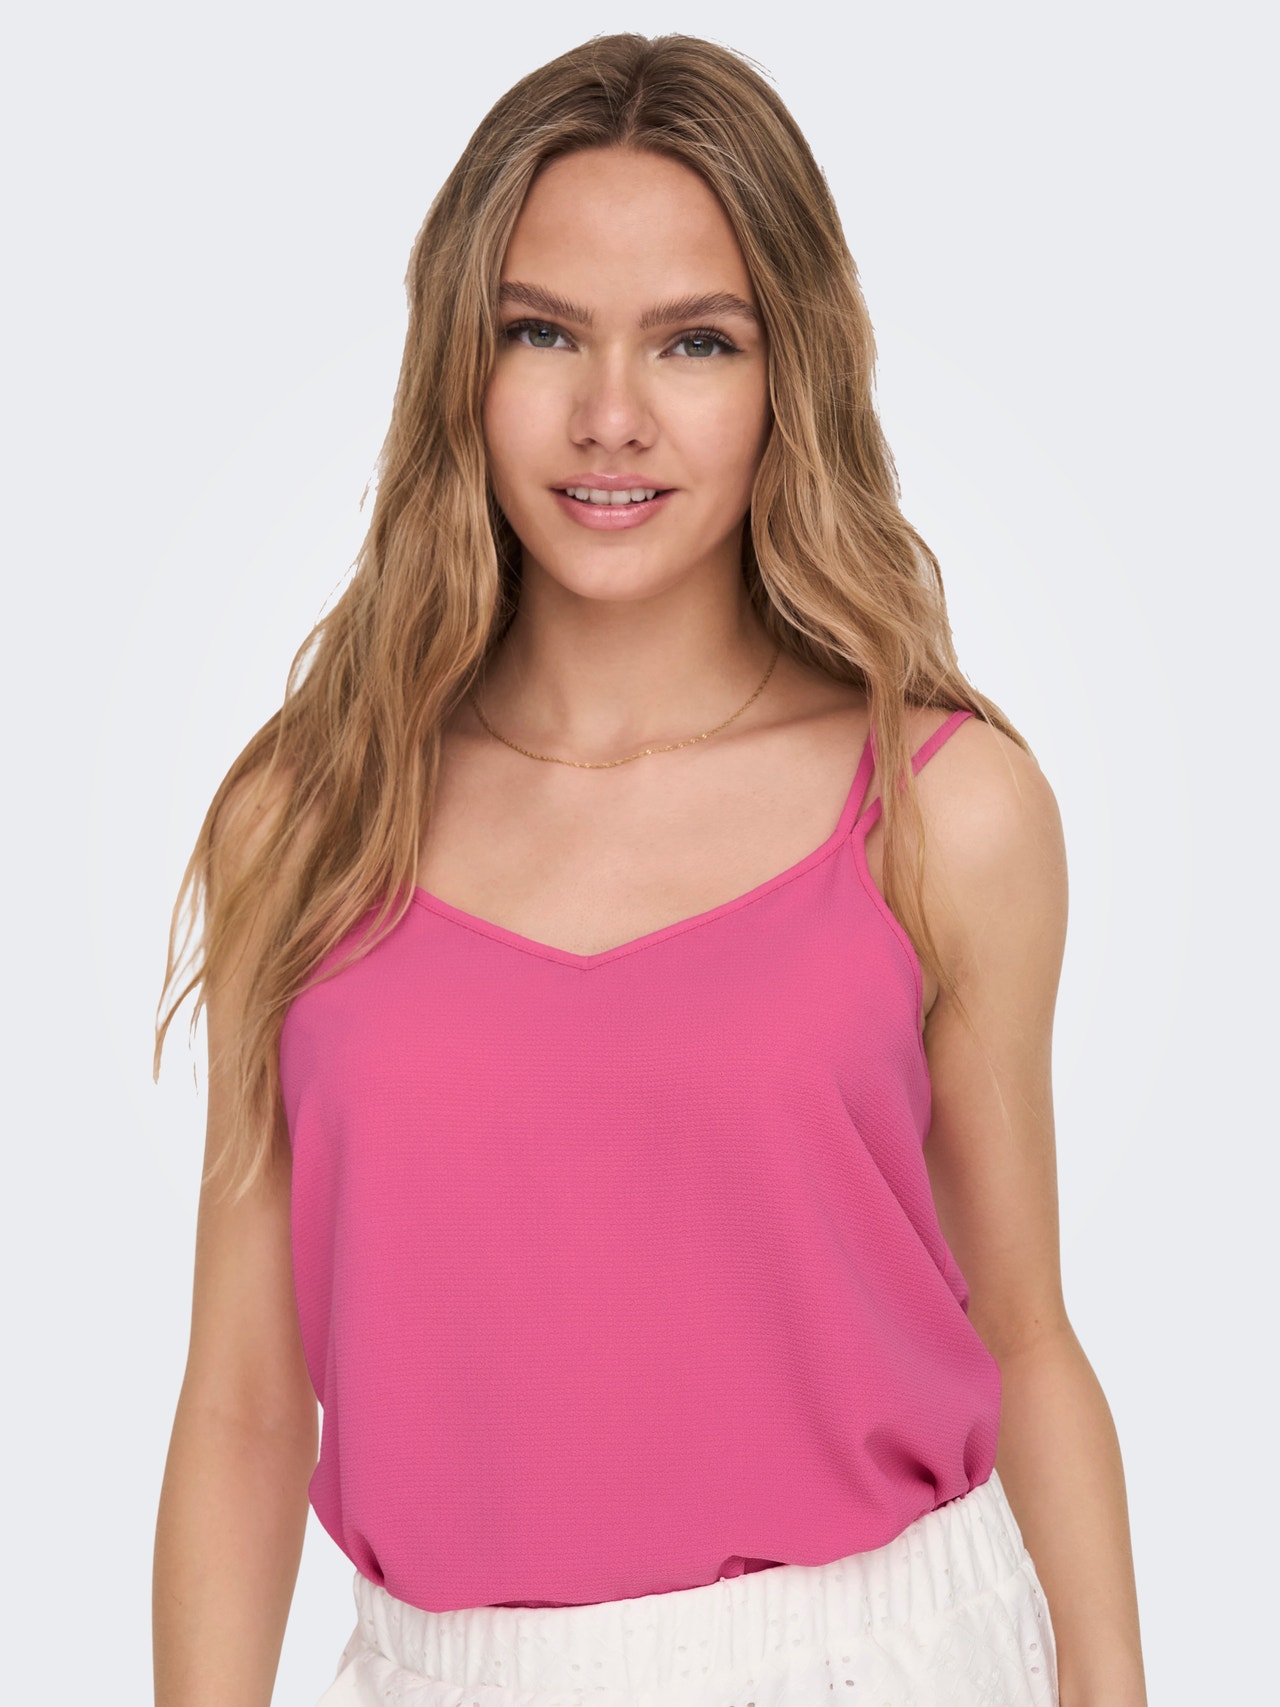 ONLY Back detailed Top -Pink Power - 15257310